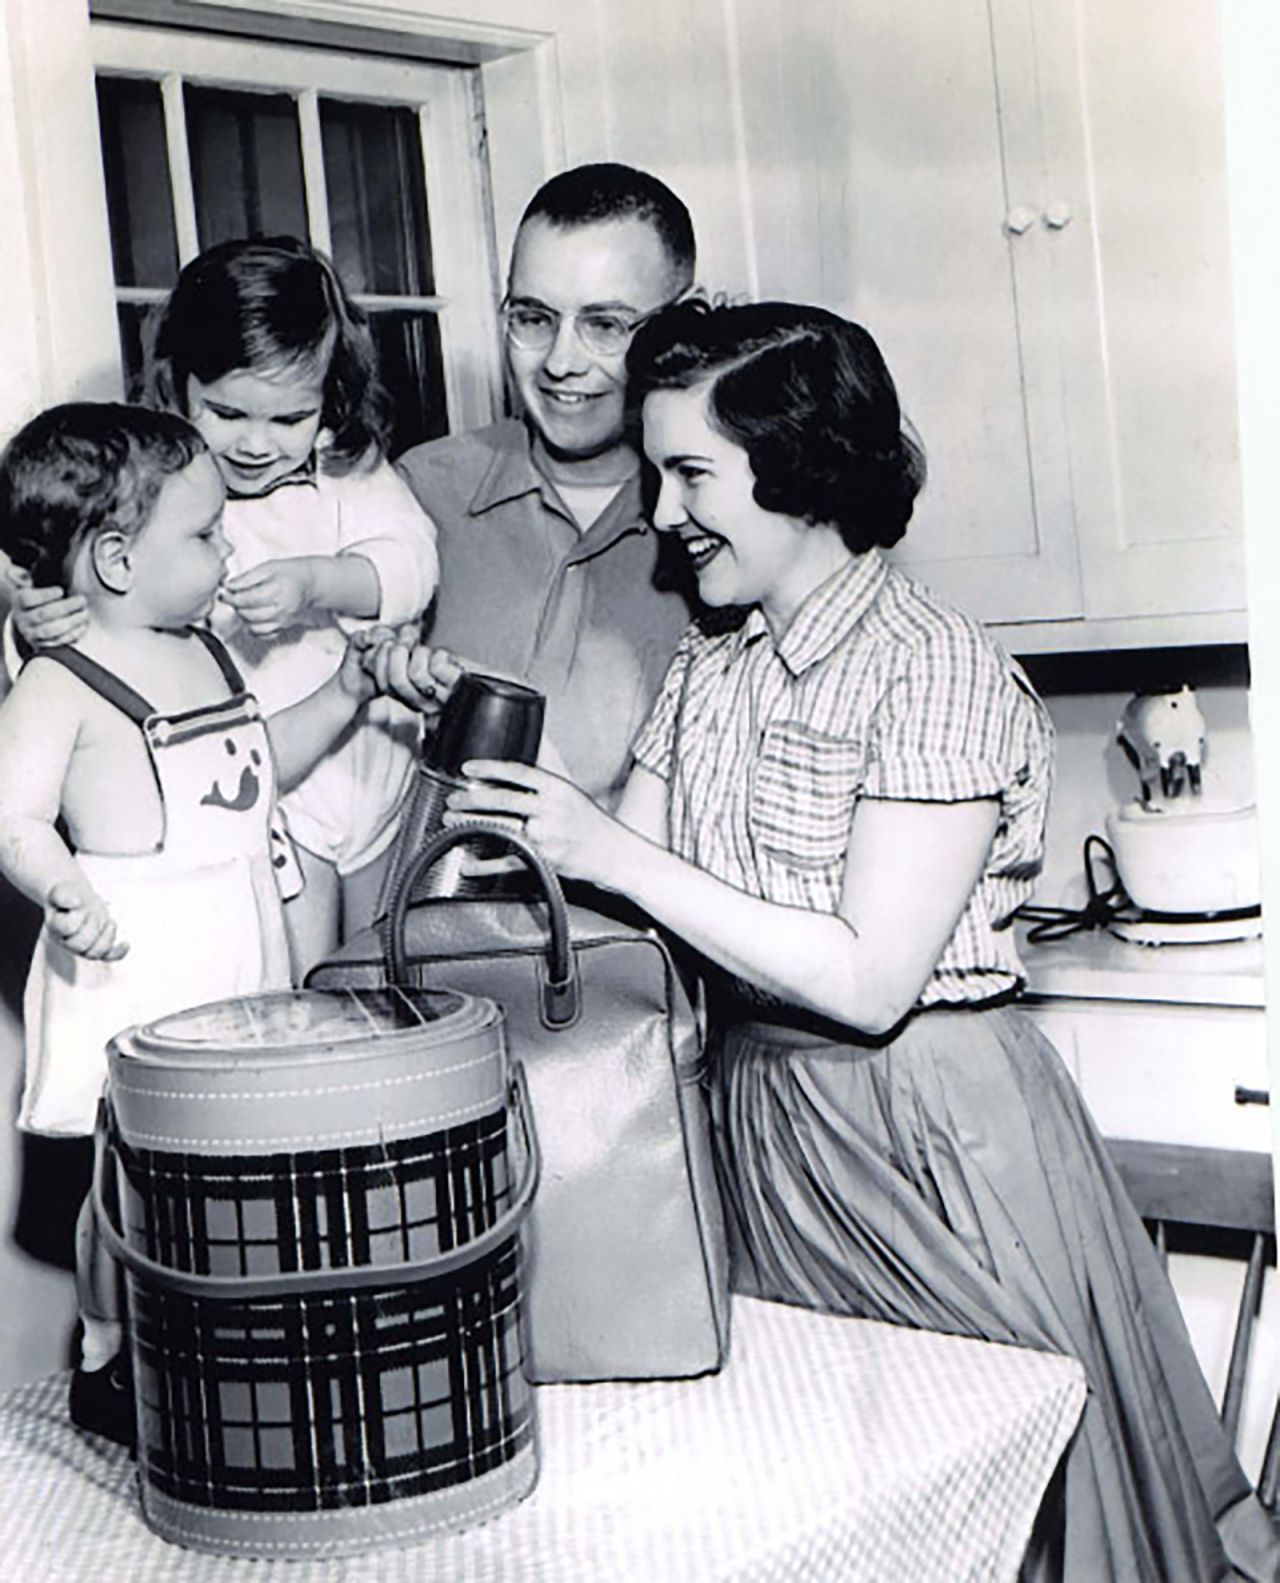 Buffett married his first wife, Susan, in 1952. They had three children together: Peter, Howard and Susan. The latter two are seen here with their parents.